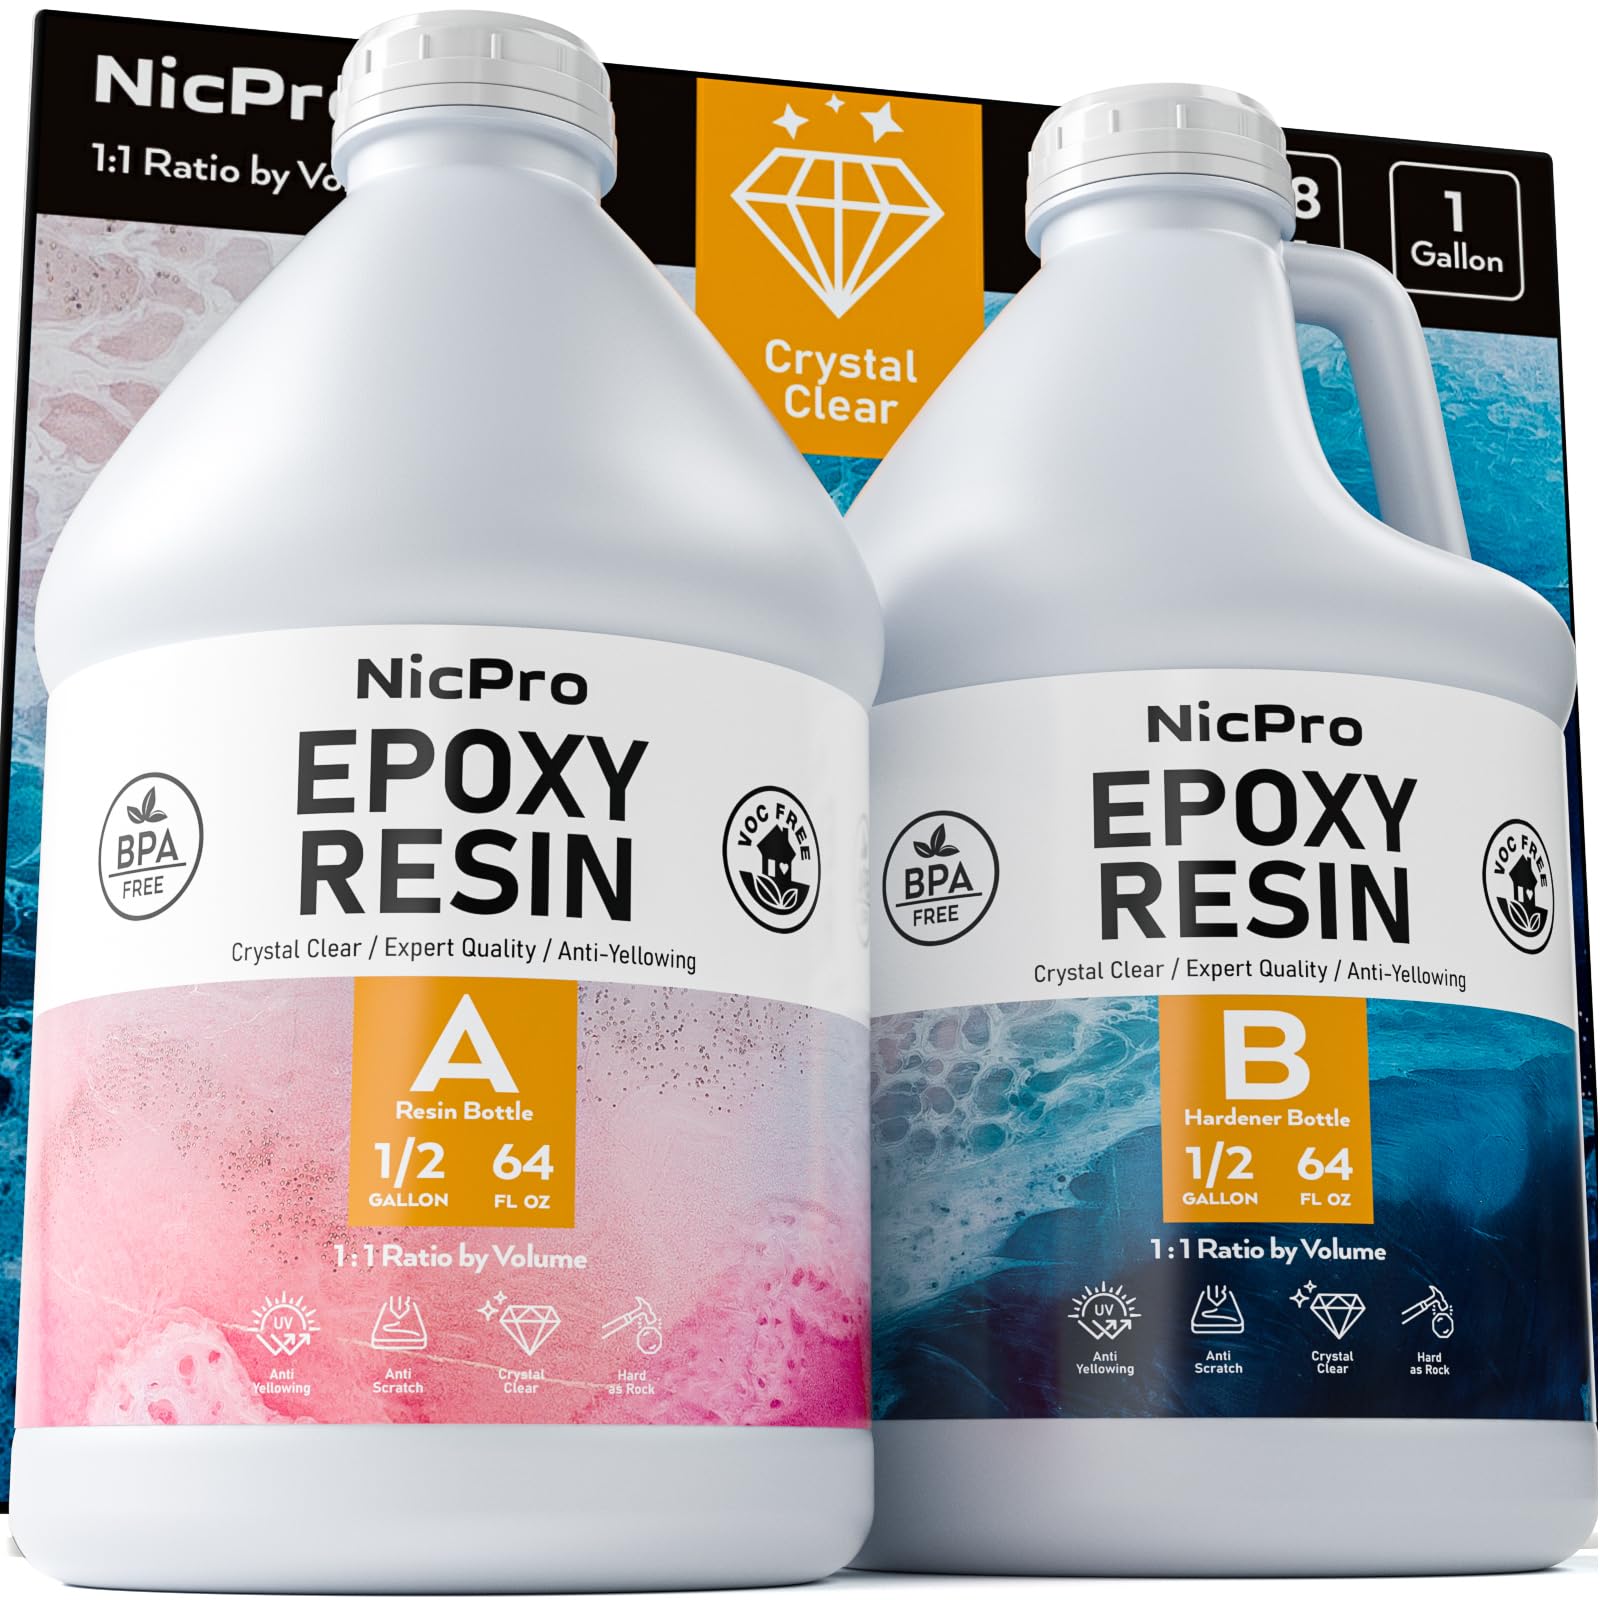 Teexpert Crystal Clear Epoxy Resin Kit 2 Gallon Self-Leveling Coating and  Casting Resin, High-Gloss & Bubbles Free Resin and Hardener Kit for DIY  Art